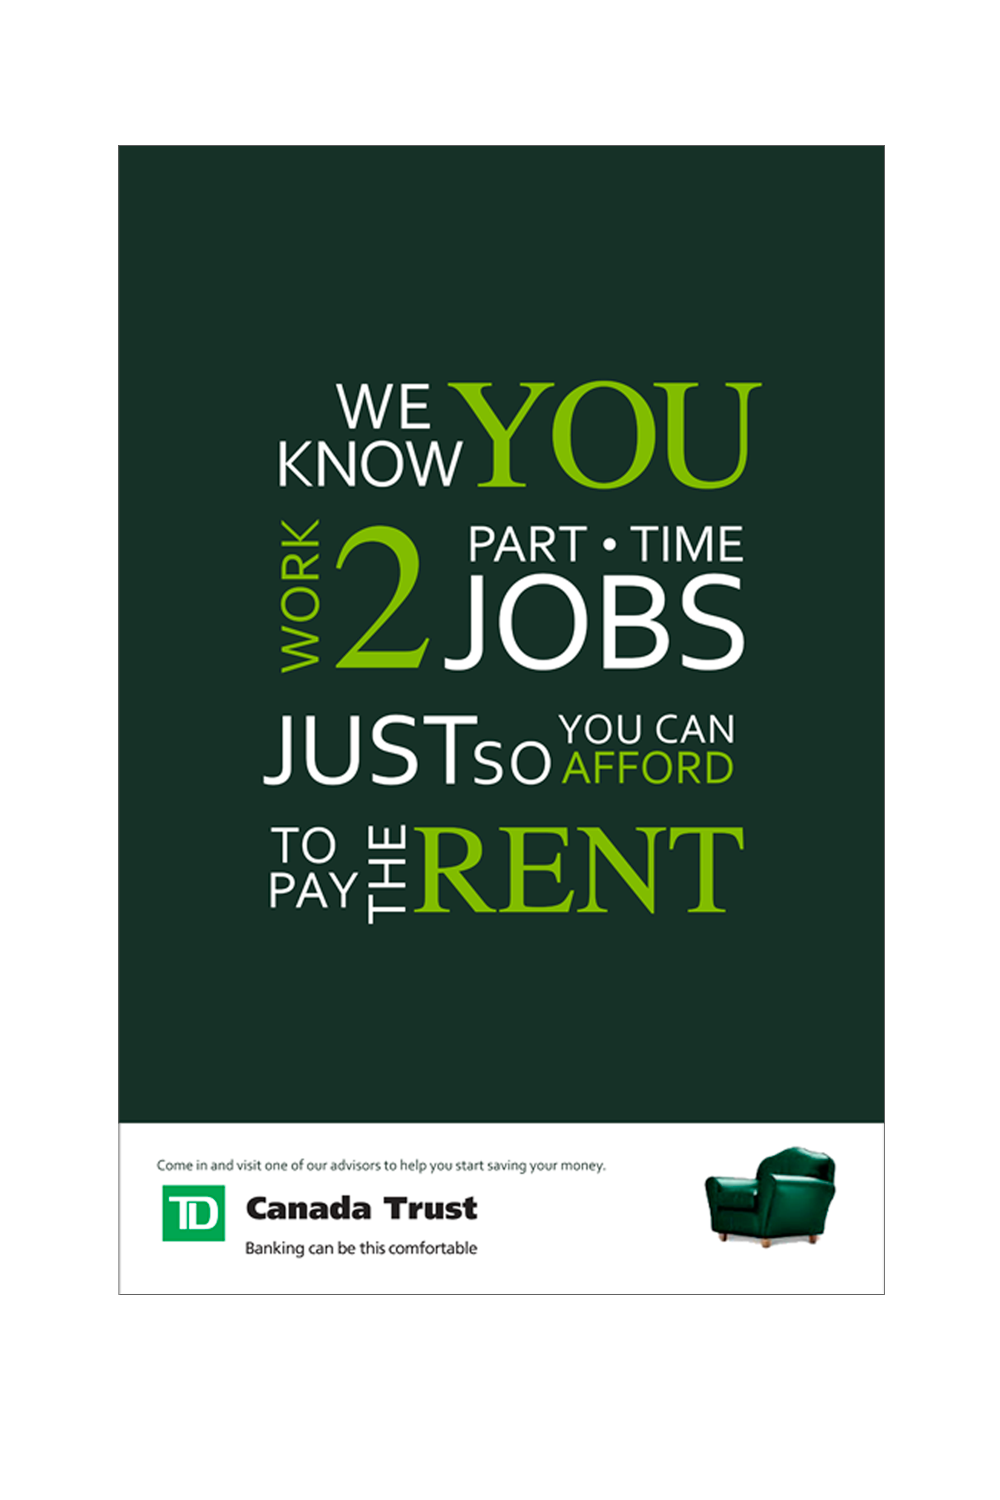 We know you work 2 part time jobs, just so you can afford to pay the rent